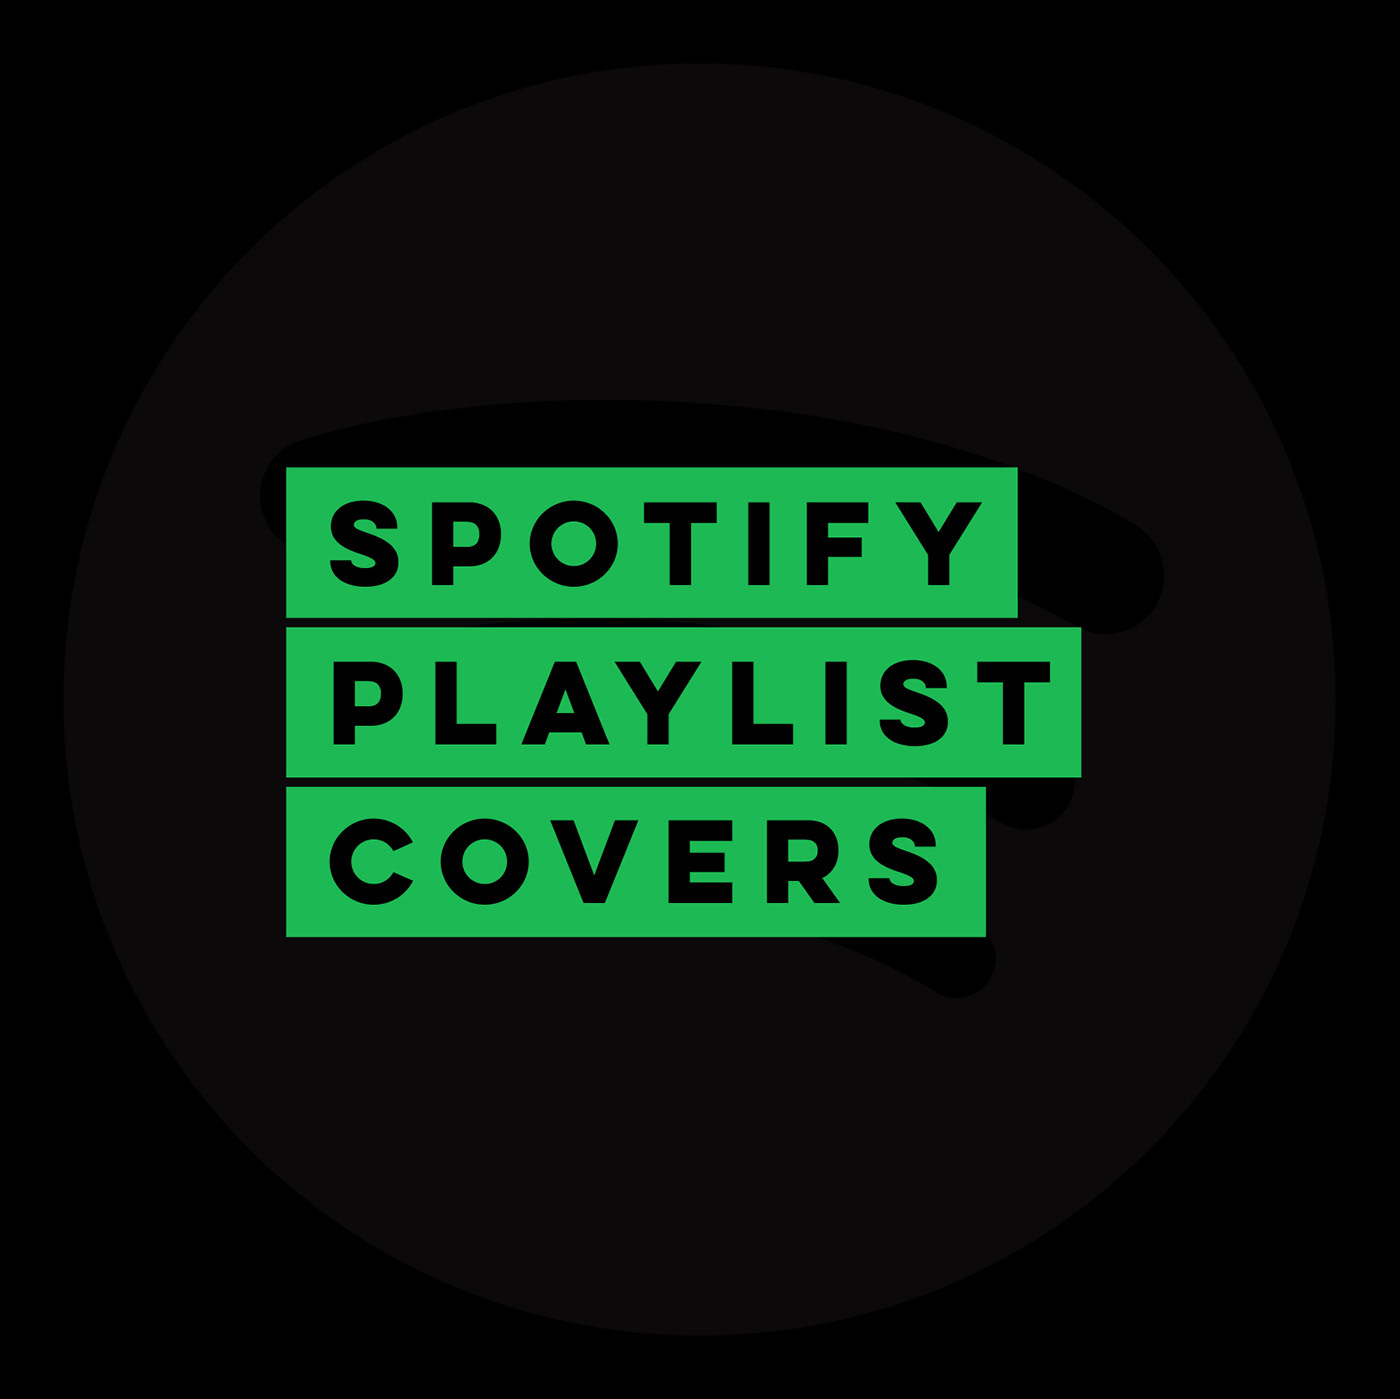 #art #cover   #curator #Design #illustration #music #photography #Playlist #Spotify